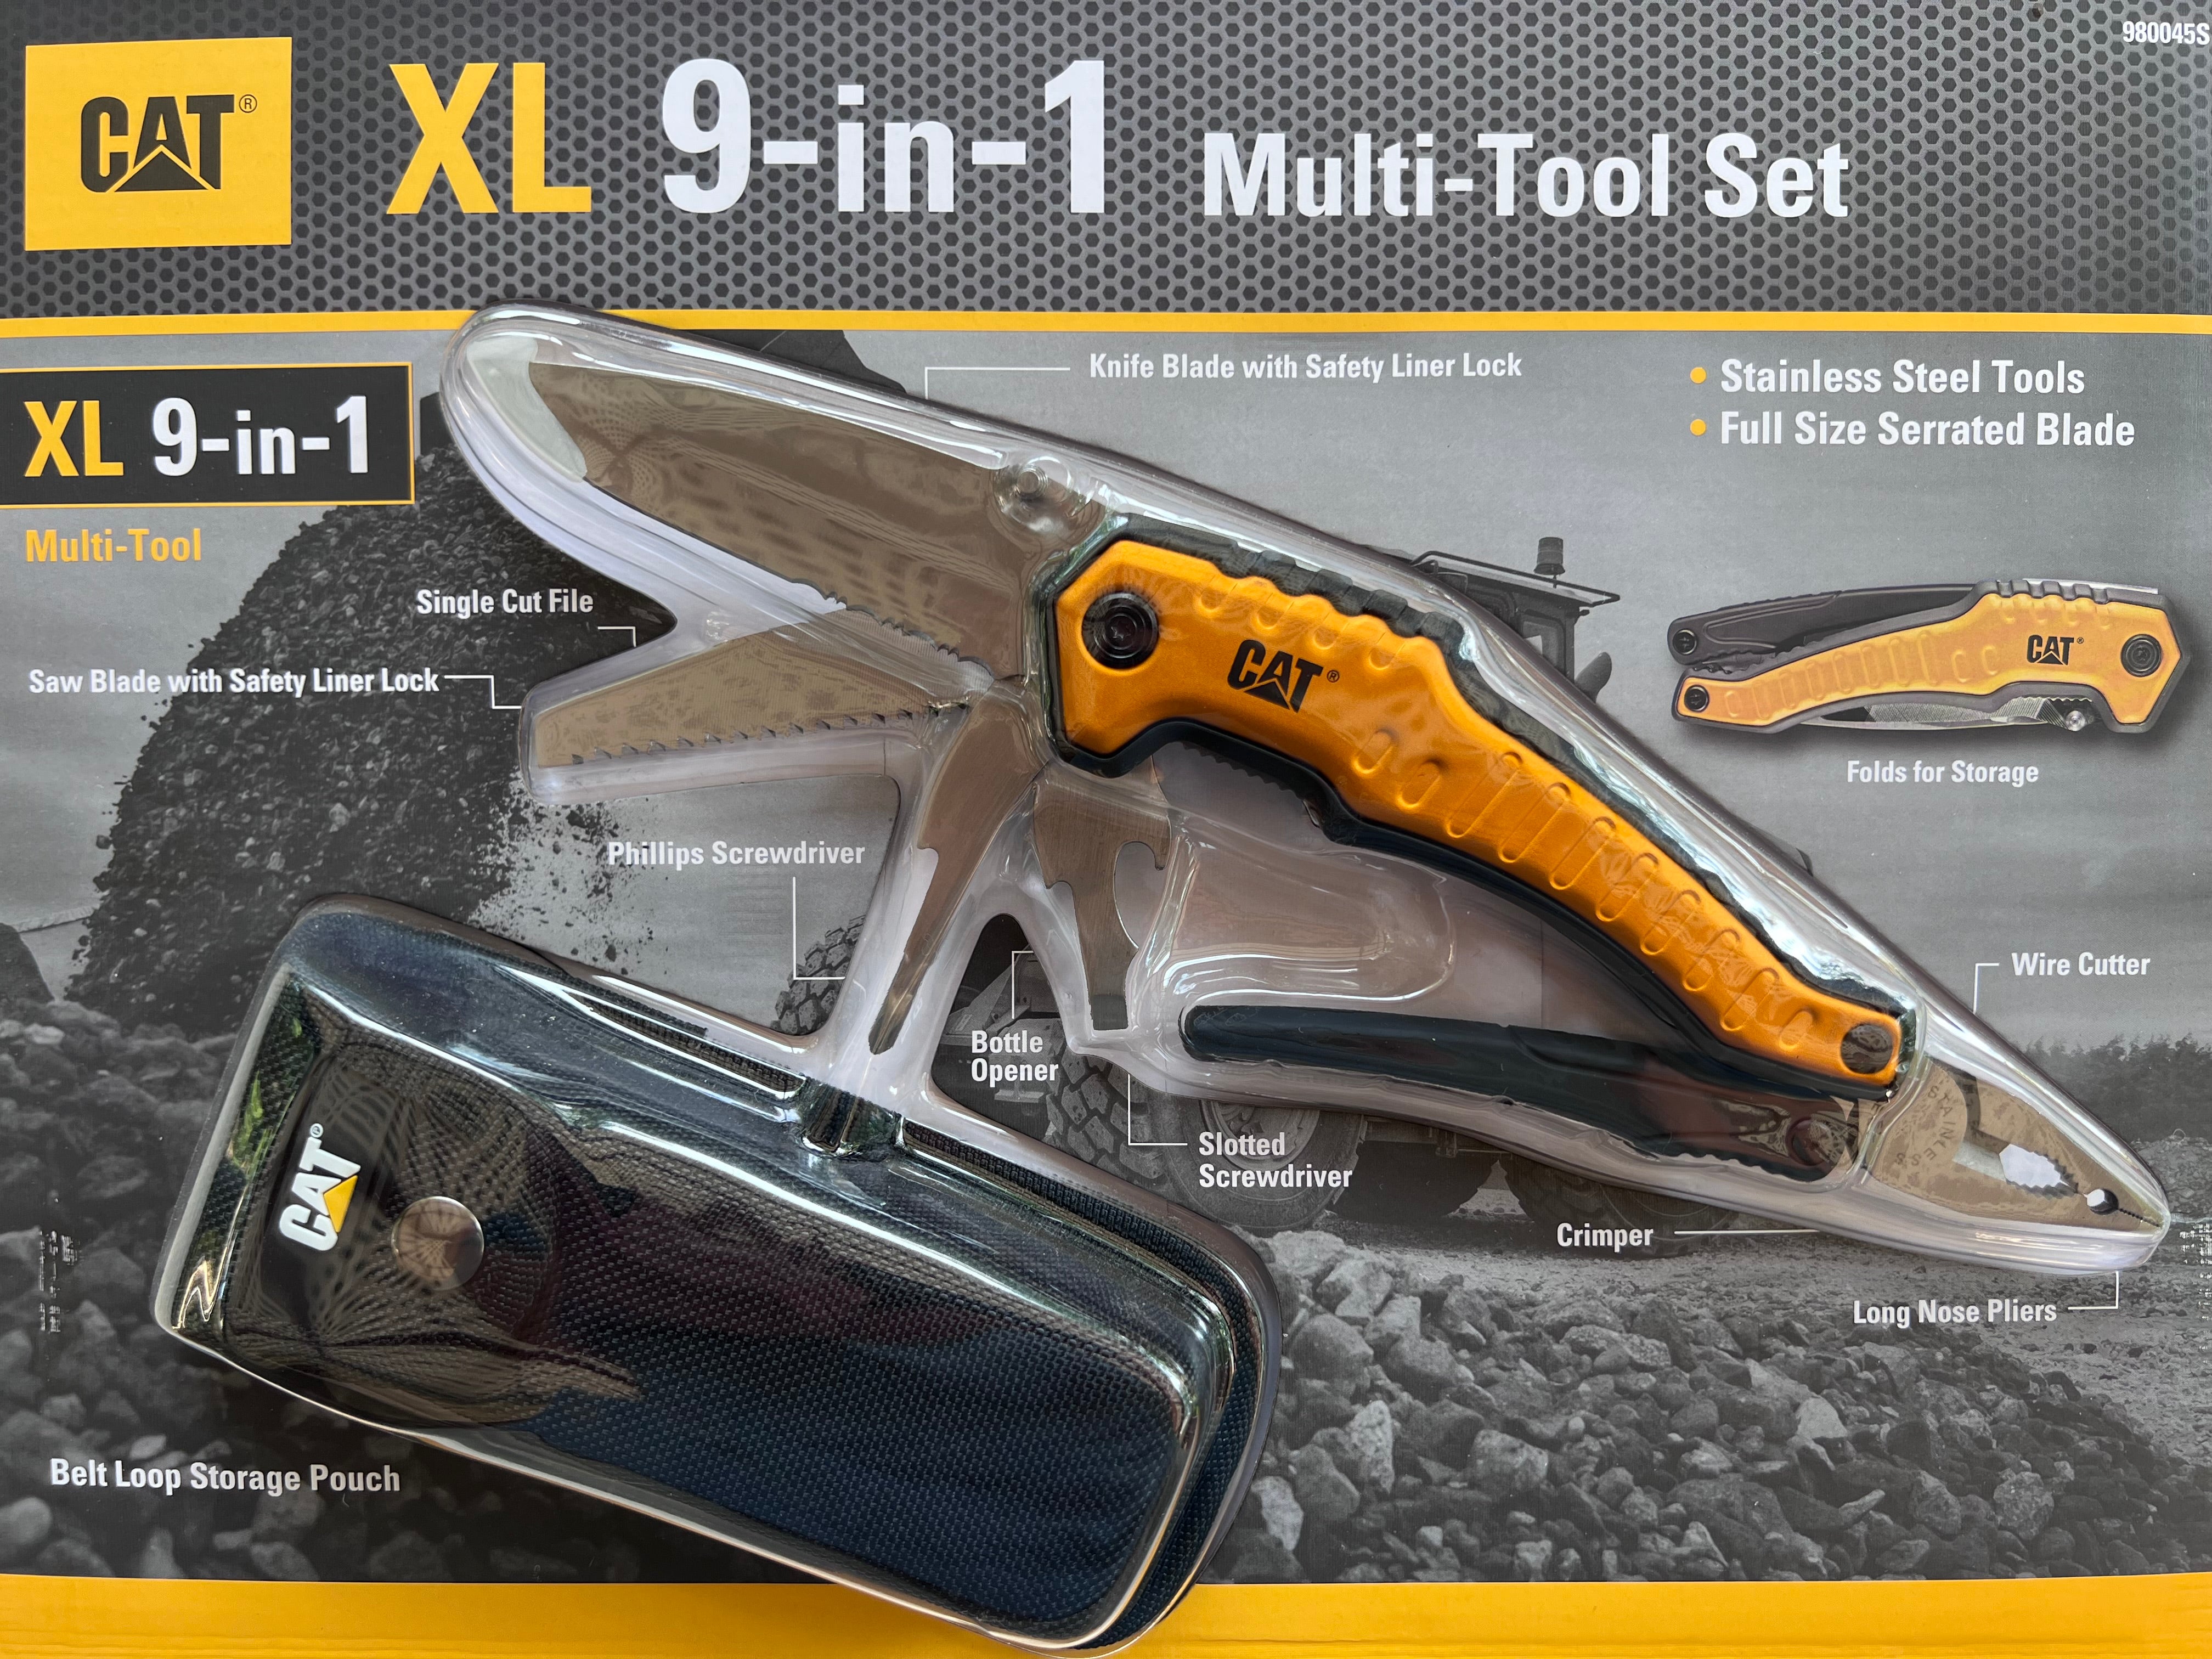 CAT Caterpillar XL 9-in-1 Multi-Tool Set Stainless Steel - Donated Goods & Services